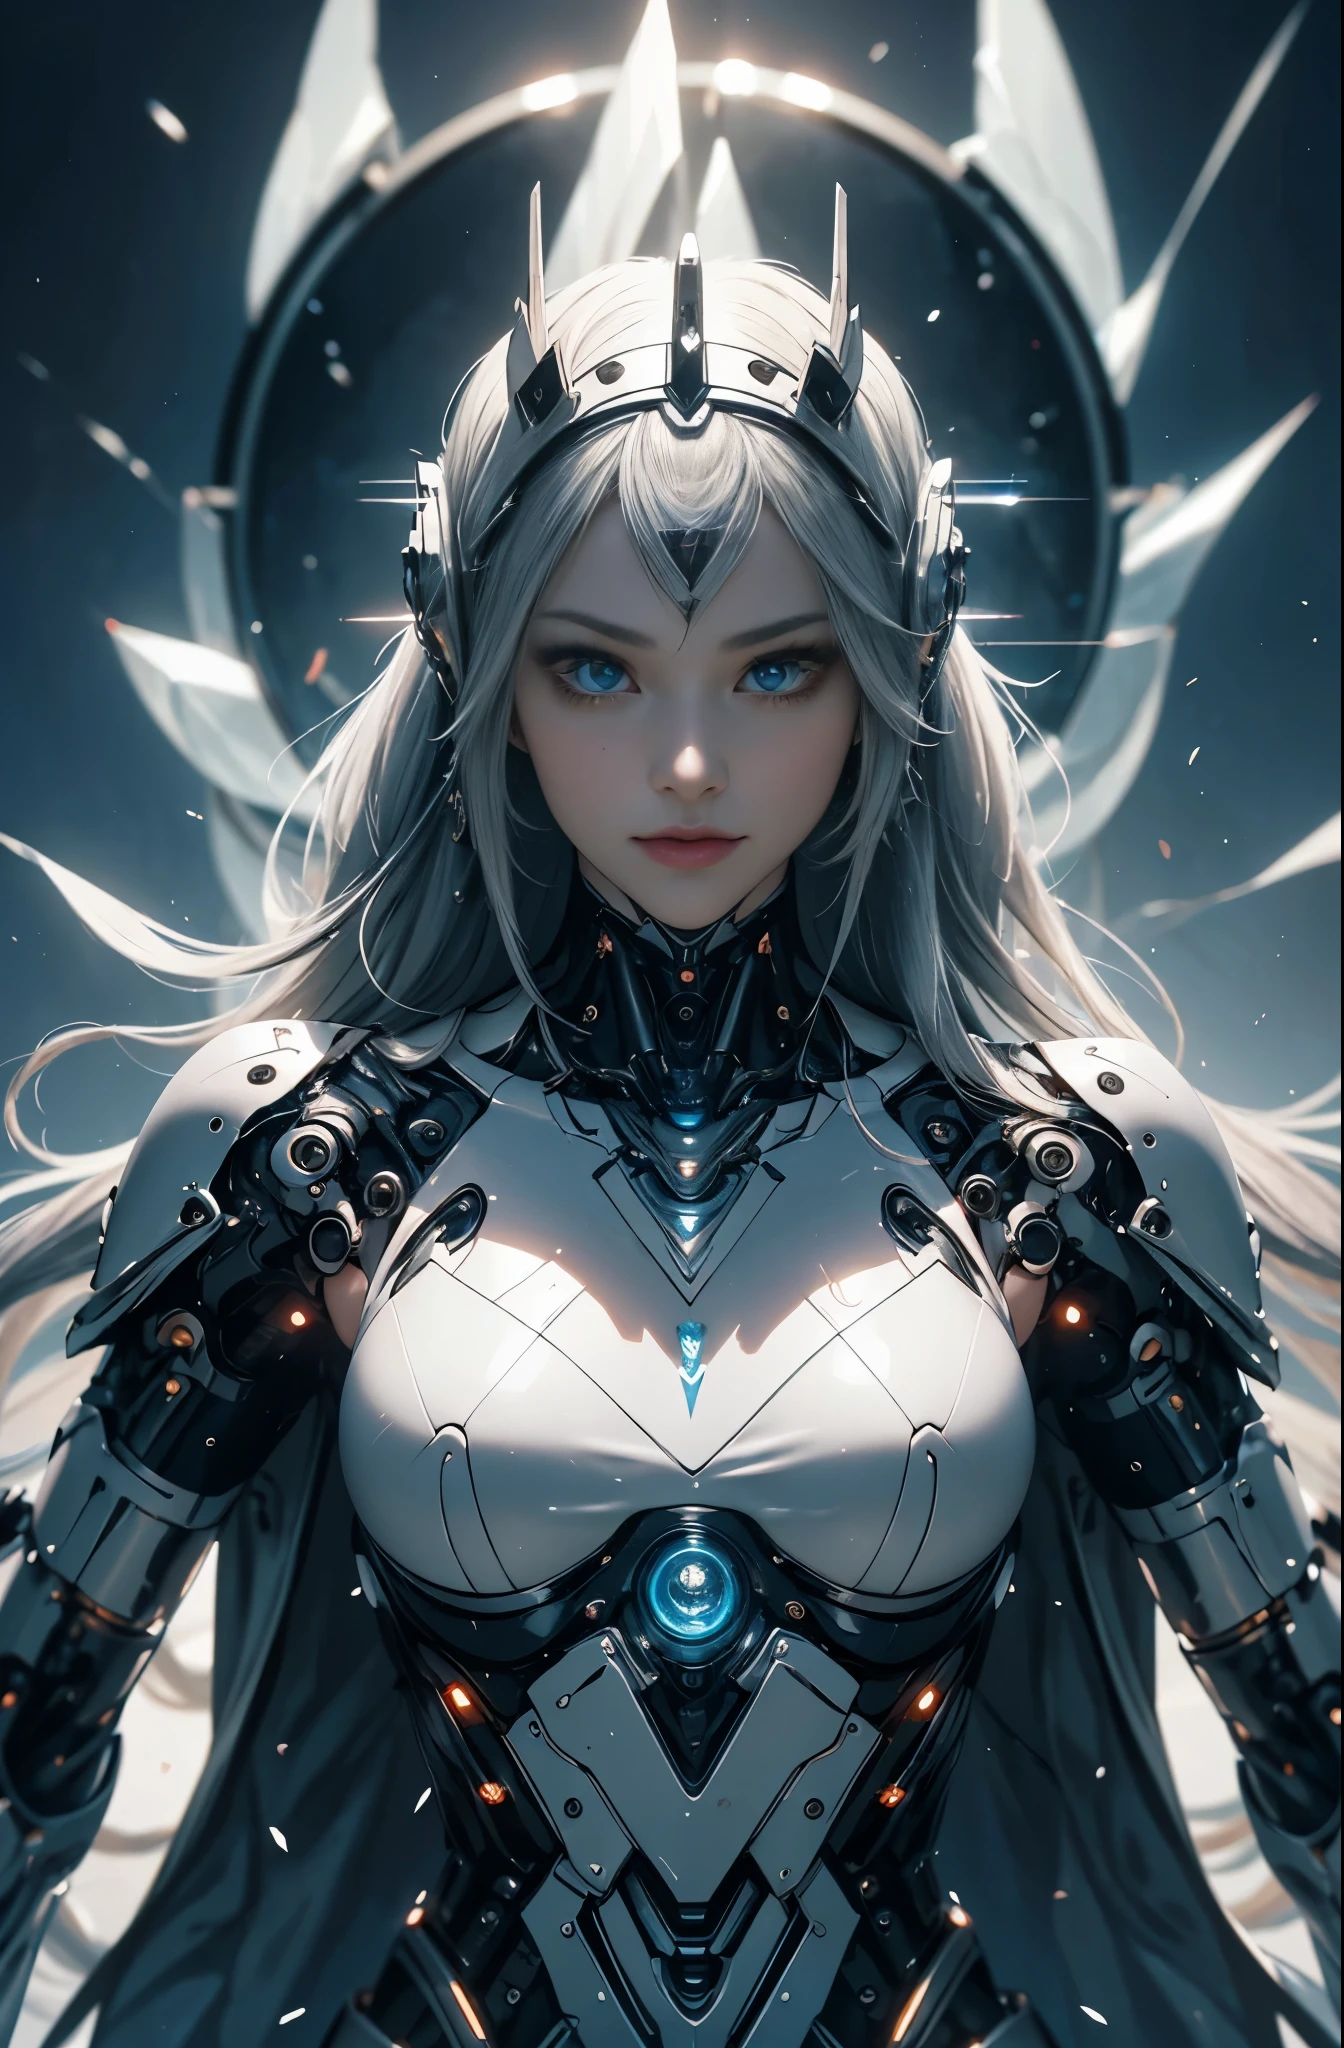 there is a woman in a futuristic suit with a sword, Beautiful Female Cyborg, cyborg womanの子, perfect anime cyborg woman, Cyborg - Girl, Beautiful Caucasian Young Female Cyborg, beautiful cyborg priestess, cyborg woman, beautiful alluring Female Cyborg, cyberpunk robotic elvish queen, Cyborg - Girl with silver hair, beautiful Female Cyborg, beautiful cyborg womanの子, Female Cyborg, Goddess. extremely high detail, portrait of cyborg queen, extremely detailed goddess shot, Half body machine, Inorganic, Next generation high performance cyborg, Goddess of Machines, The perfect cyborg, ultimate replicant, A masterpiece created by ultra-high performance AI, Final weapon, Best Quality, Perfect Angle, perfect-composition, sharp outline, Best Shots, perfect shapes, perfect model style, Very beautiful and detailed eyes, Hollow eyes, blue eyes without pupils